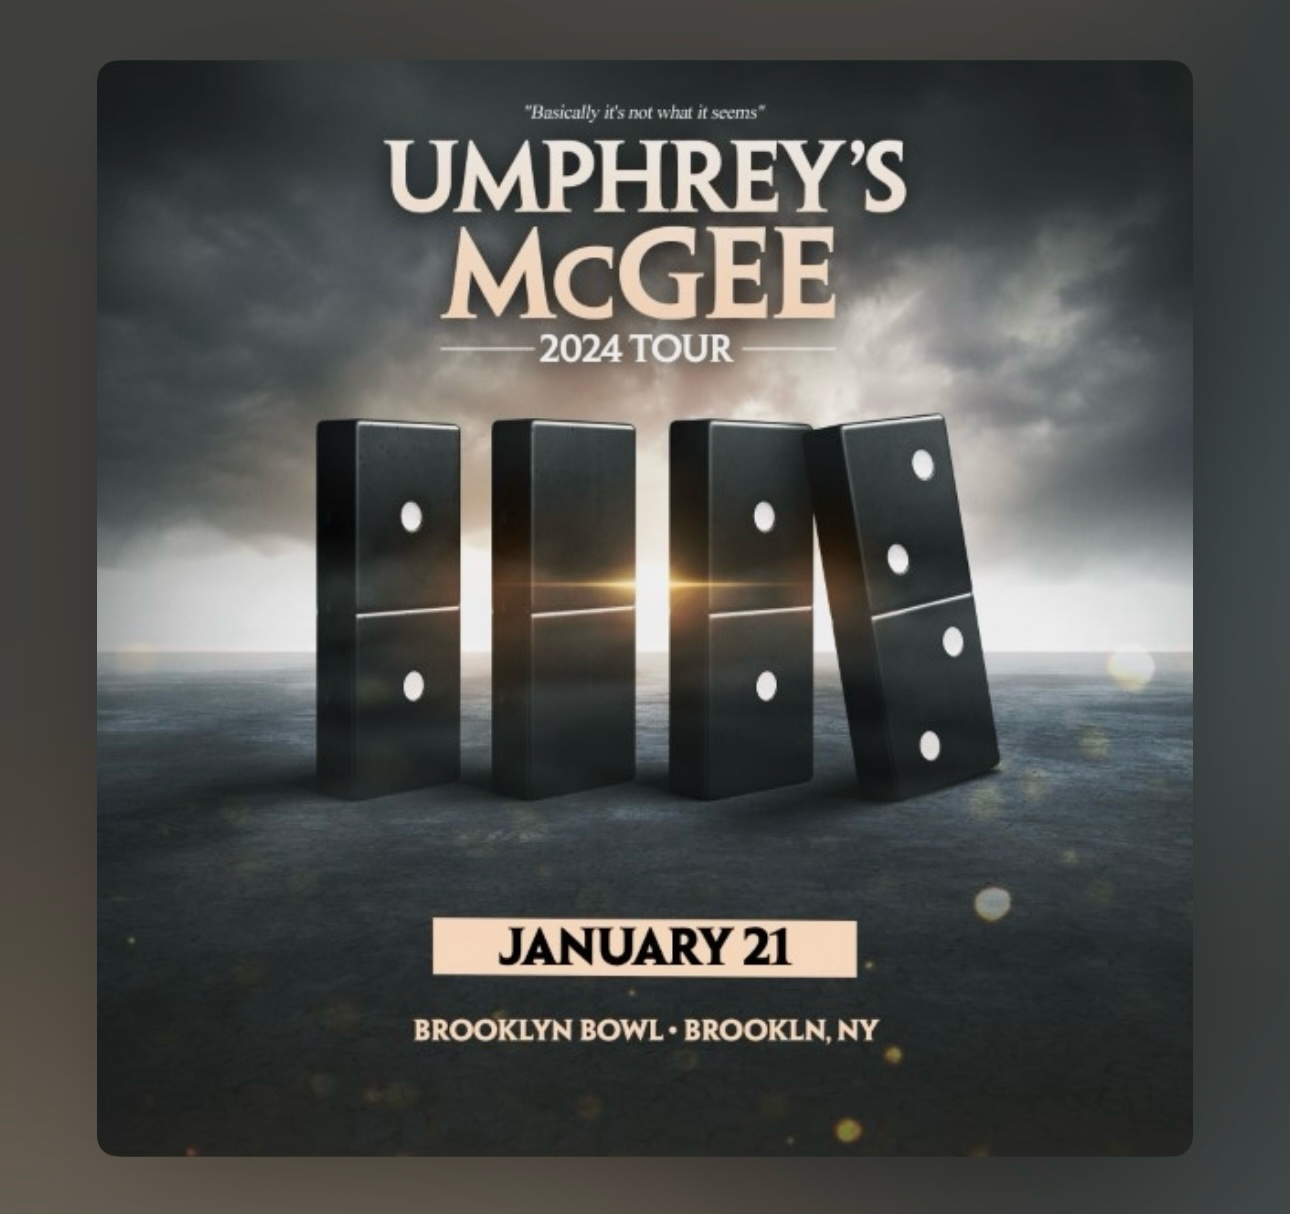 Promotional poster for Umphrey’s McGee 2024 tour featuring three large dominoes with scenic clouds in the background, announcing a concert on January 21 at Brooklyn Bowl, Brooklyn, NY.